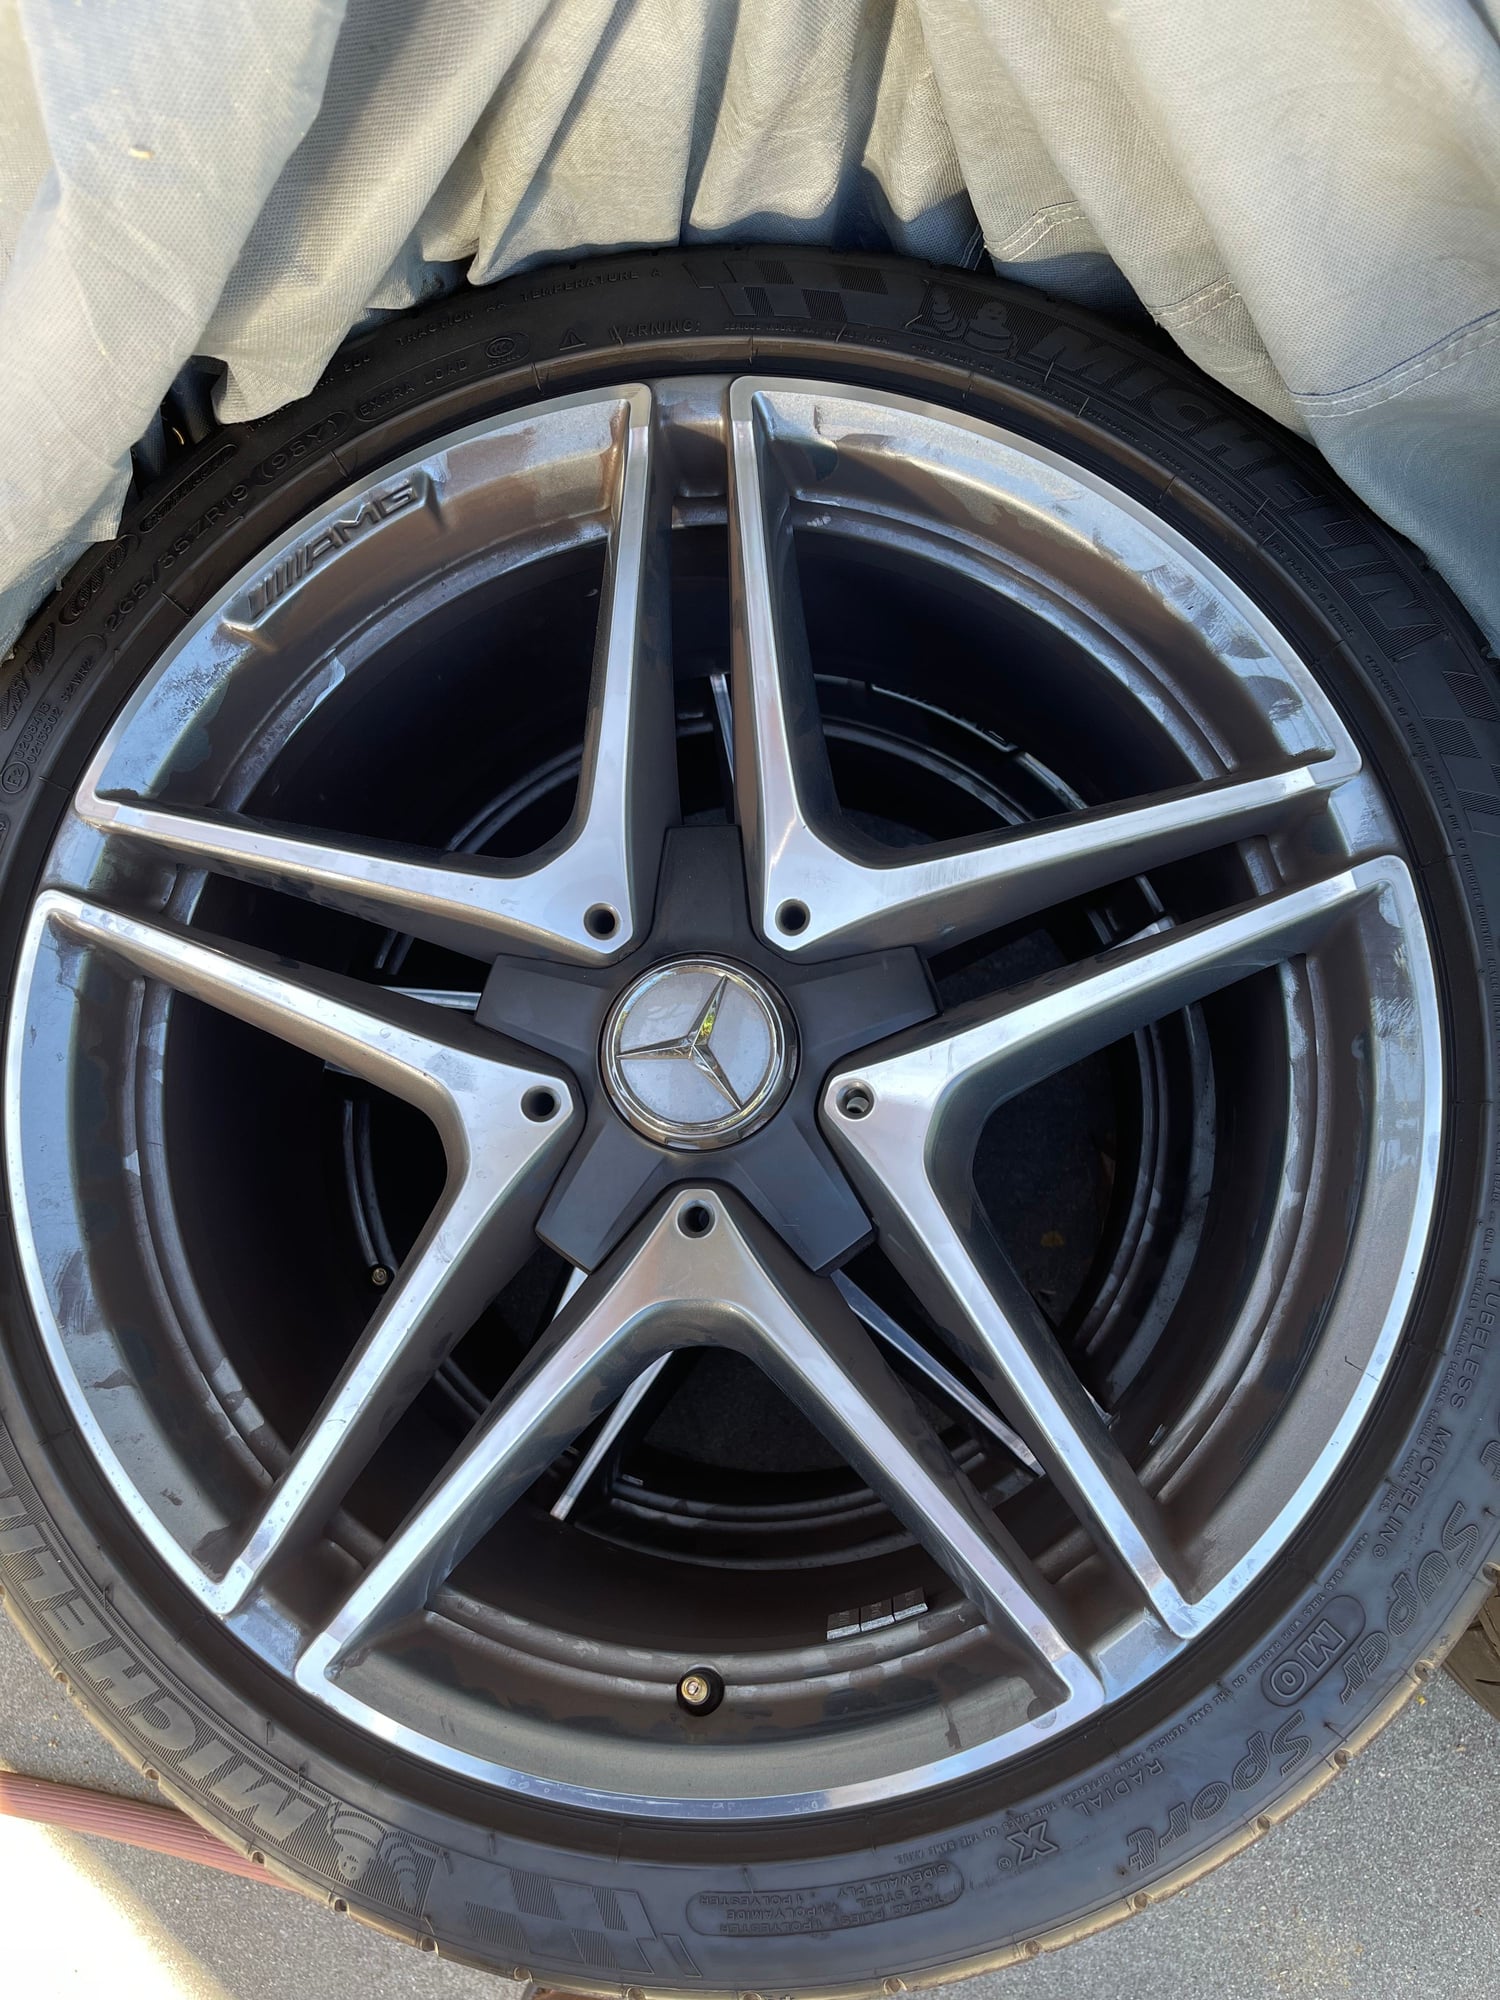 Wheels and Tires/Axles - 19” Twin-Spoke AMG wheels - Used - 2015 to 2021 Mercedes-Benz C-Class - San Jose, CA 95123, United States